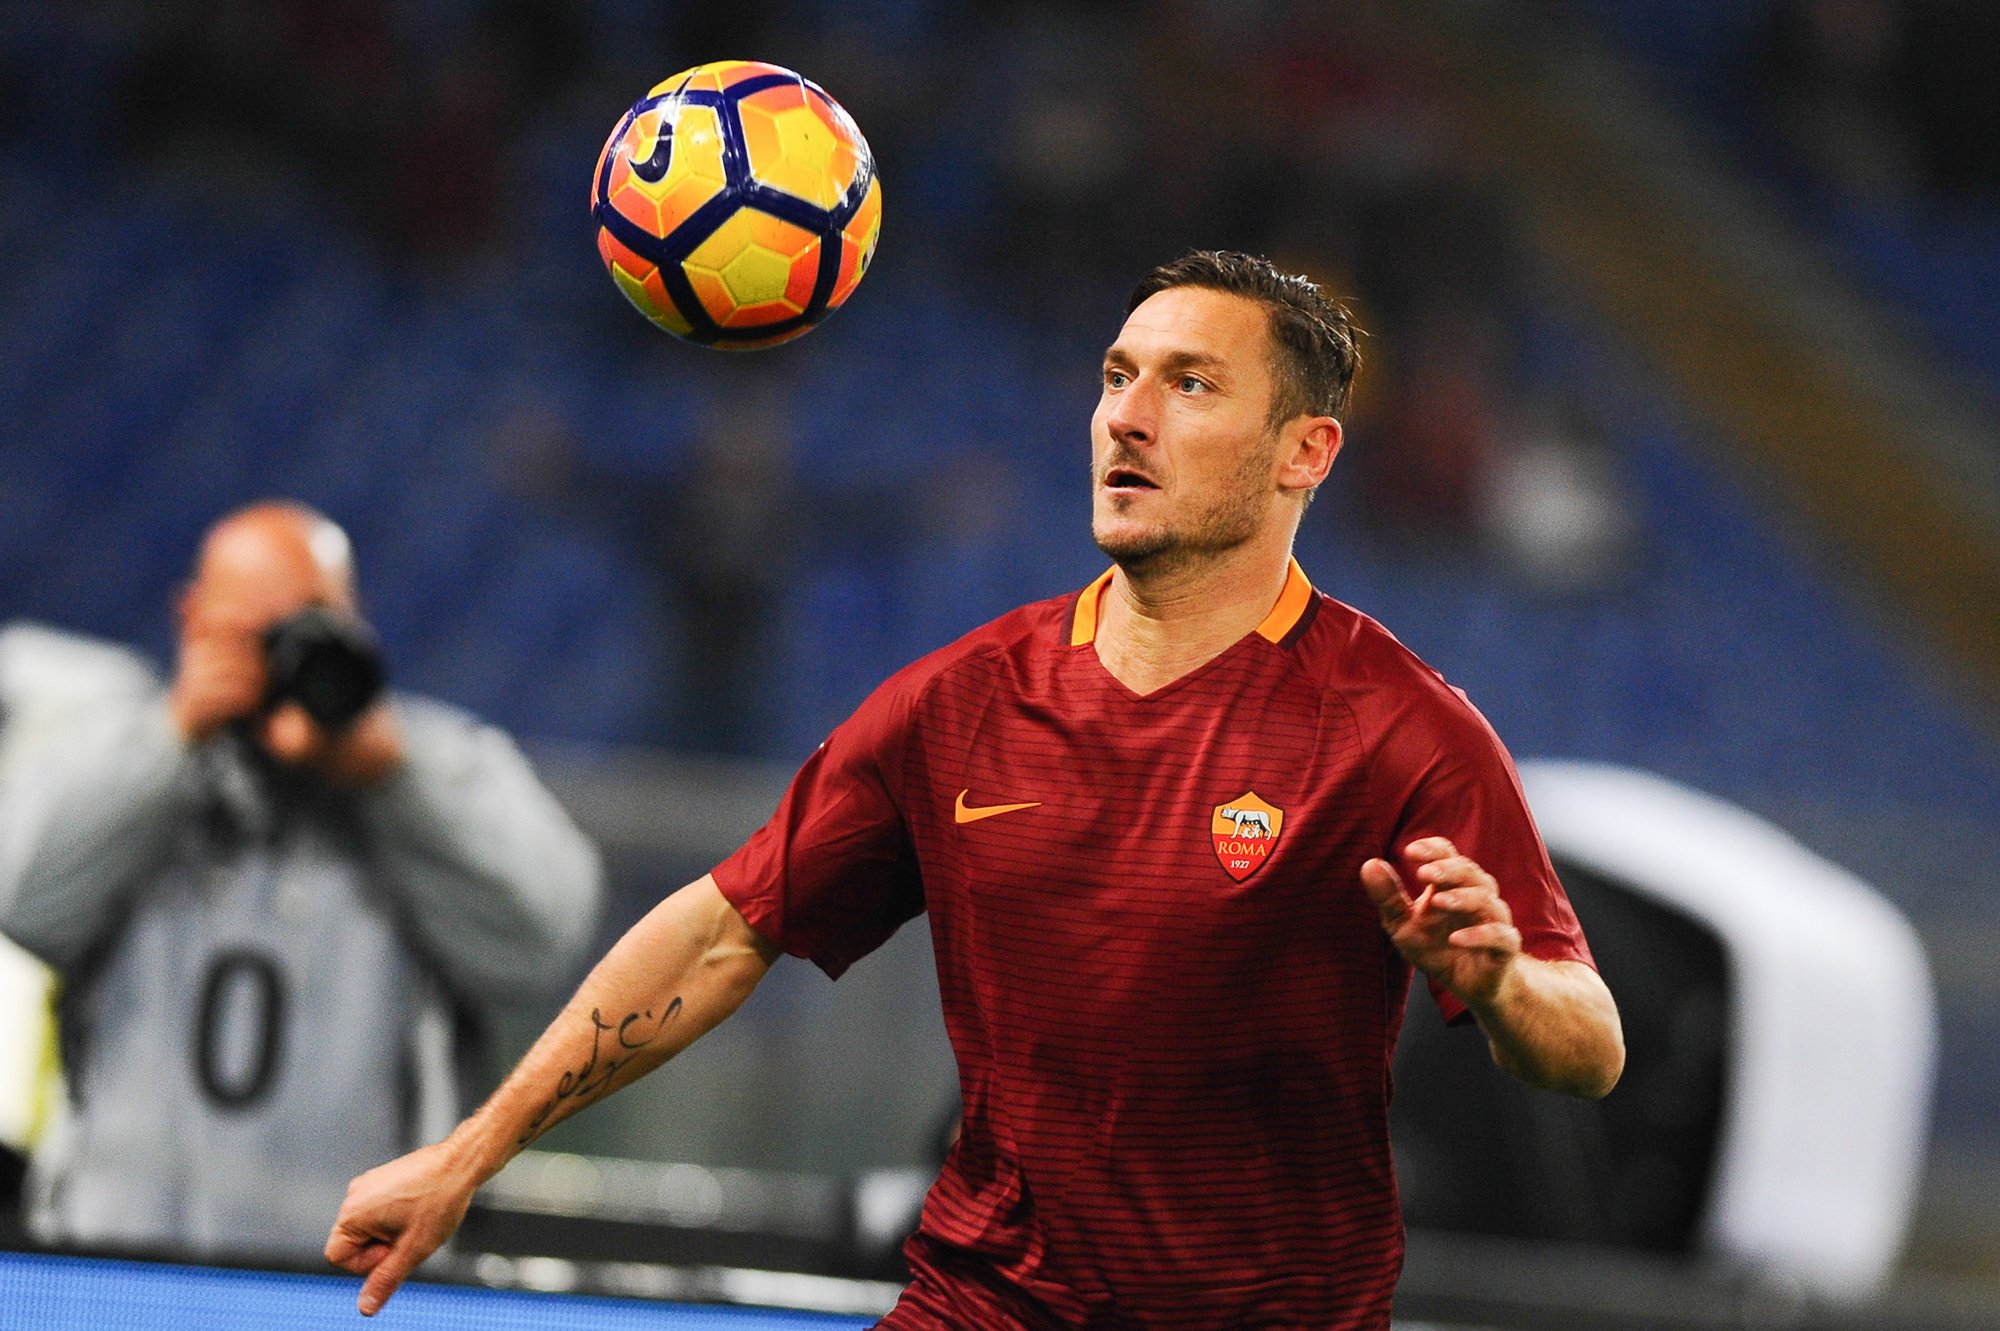 Francesco Totti during the Serie A match between Empoli and AS Roma on 27th November 2016 Photo : Cavaliere / IPP / Icon Sport